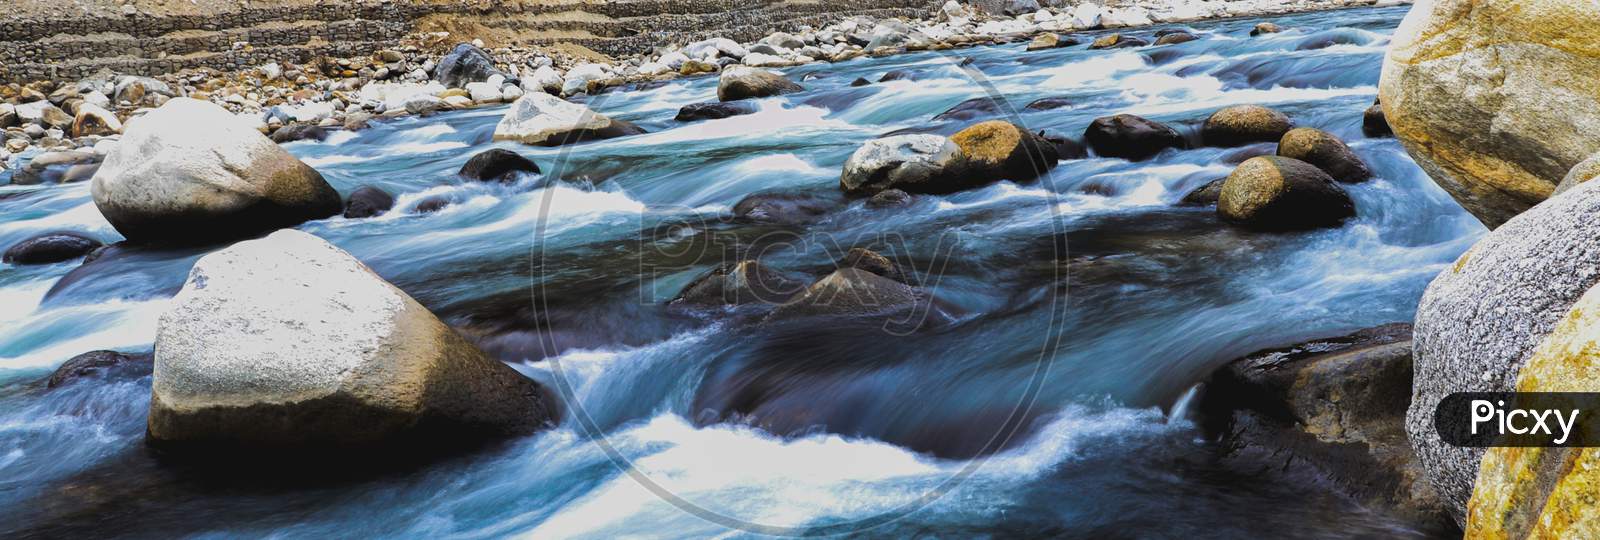 Long Exposure Of Fast Flowing River